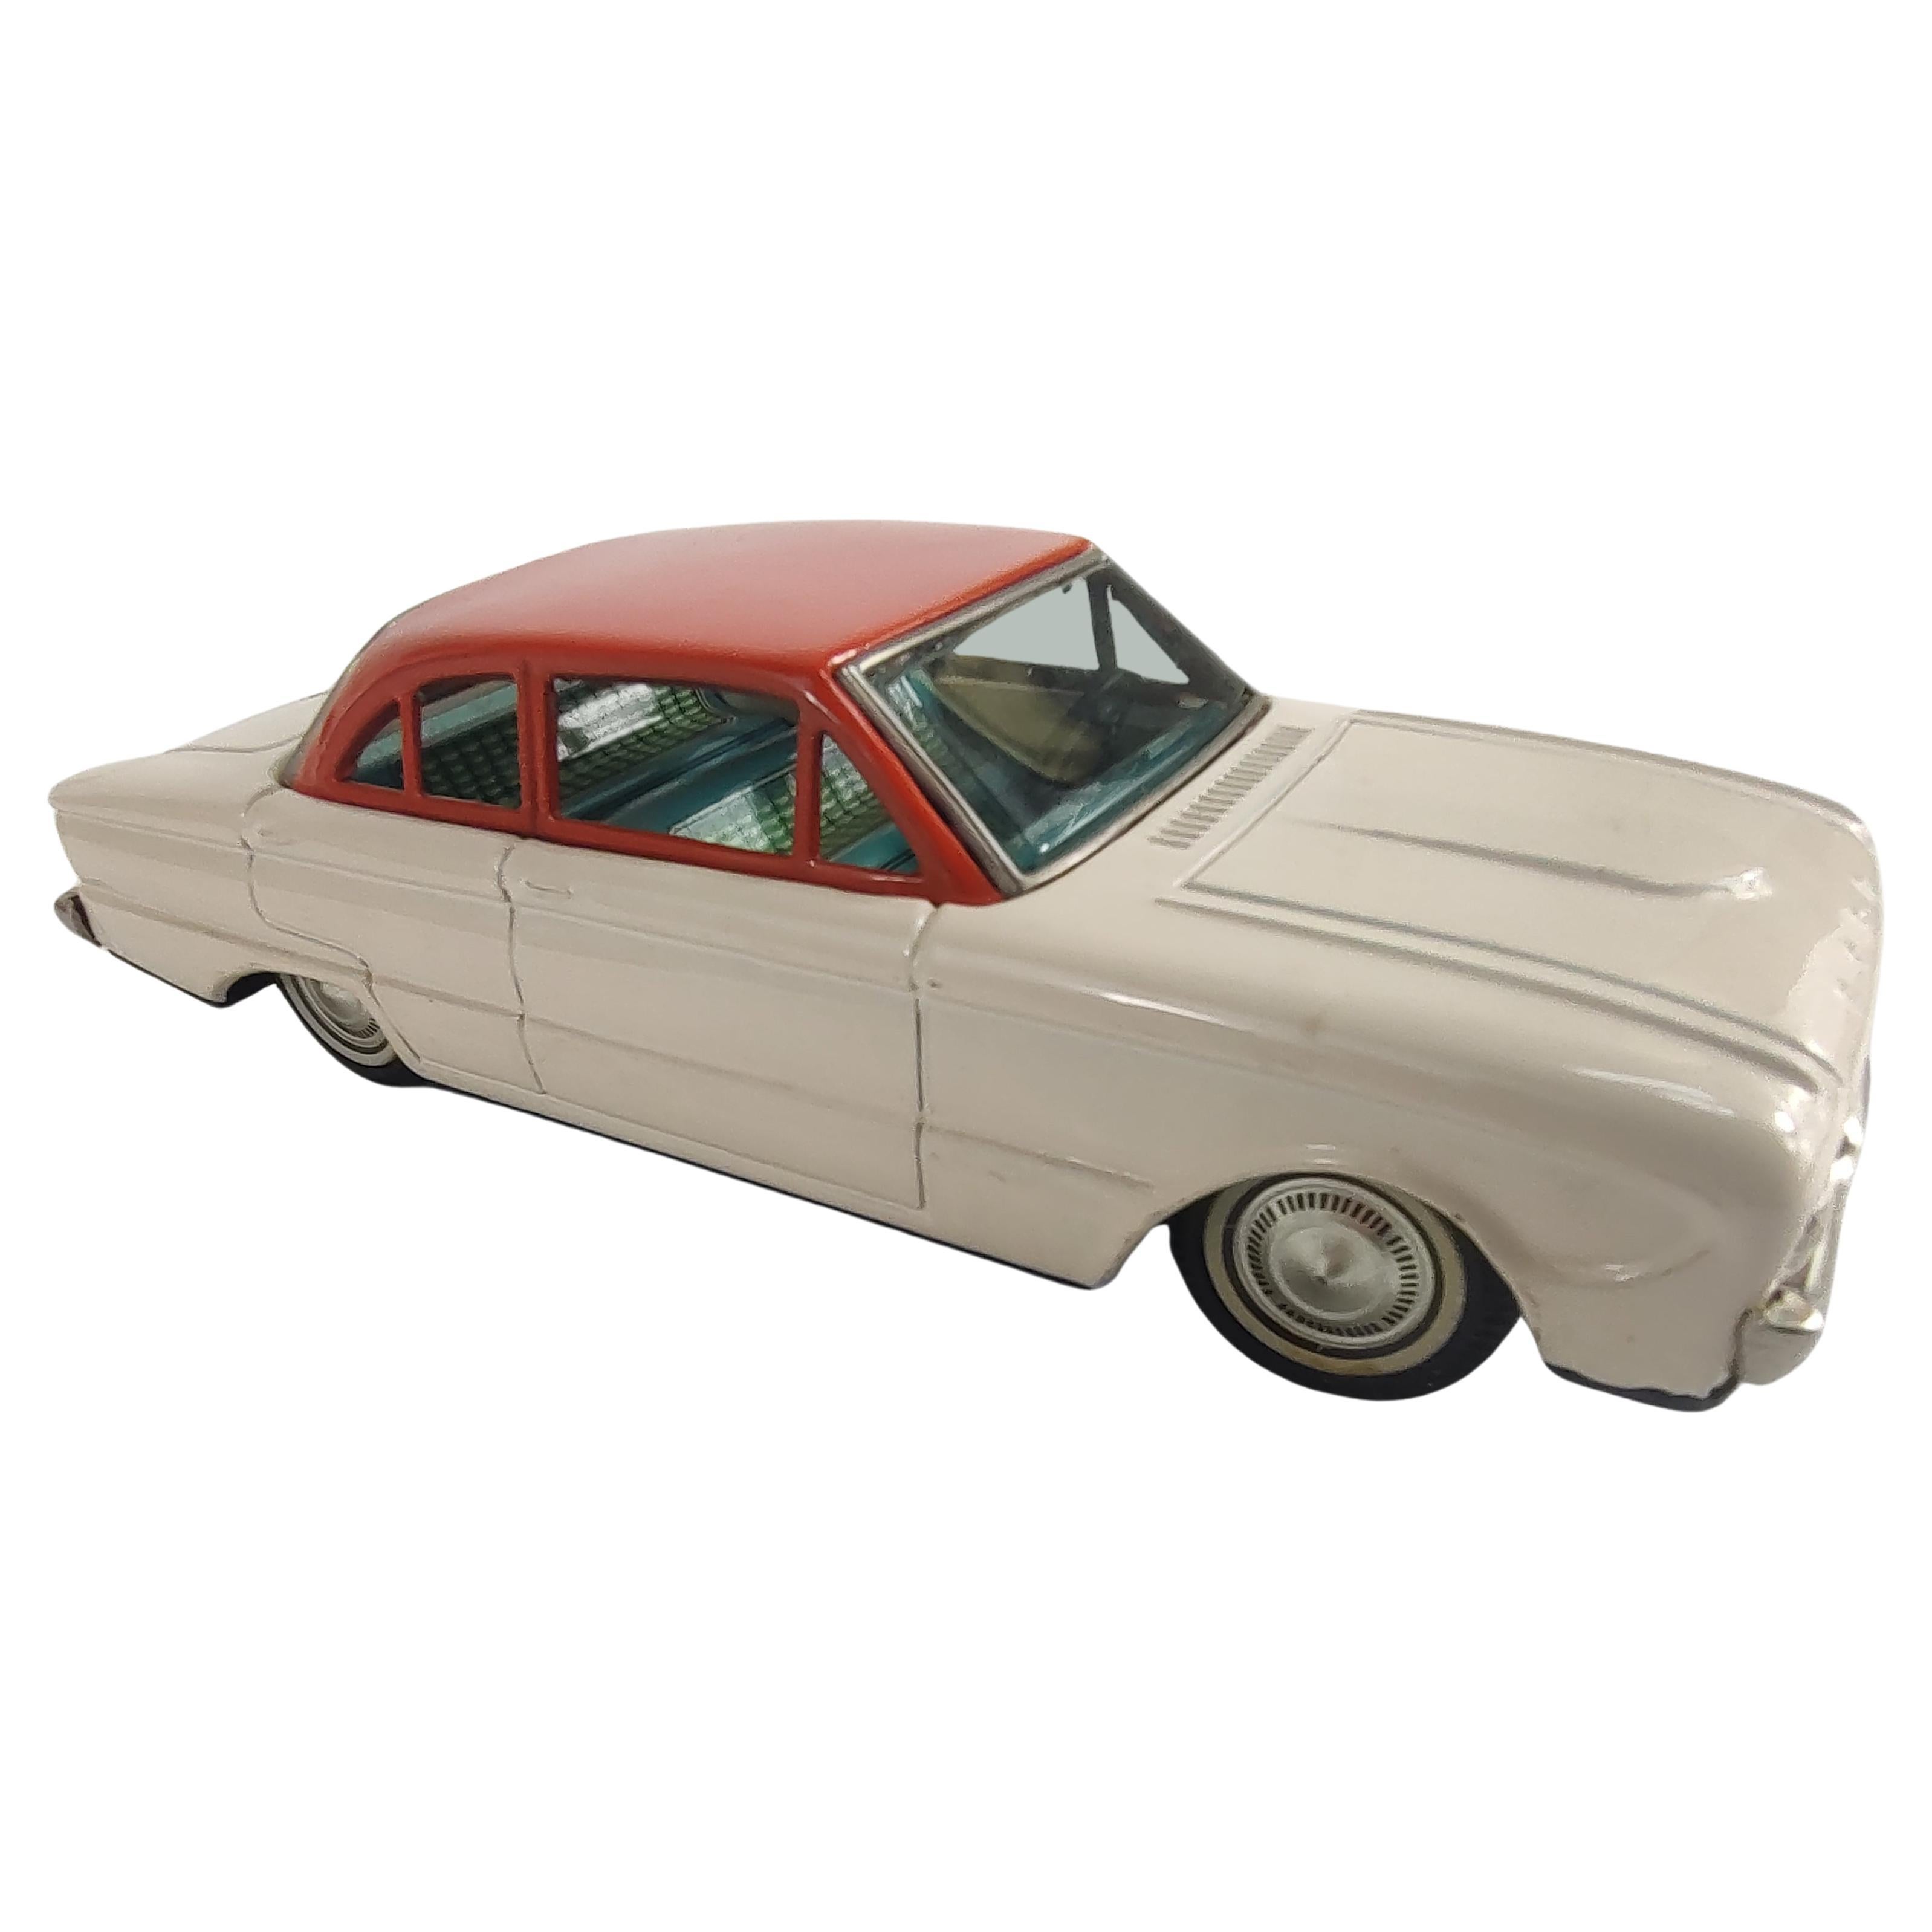 Industrial Mid Century Japanese Tin Litho Toy Car Ford Falcon Friction C1960 For Sale